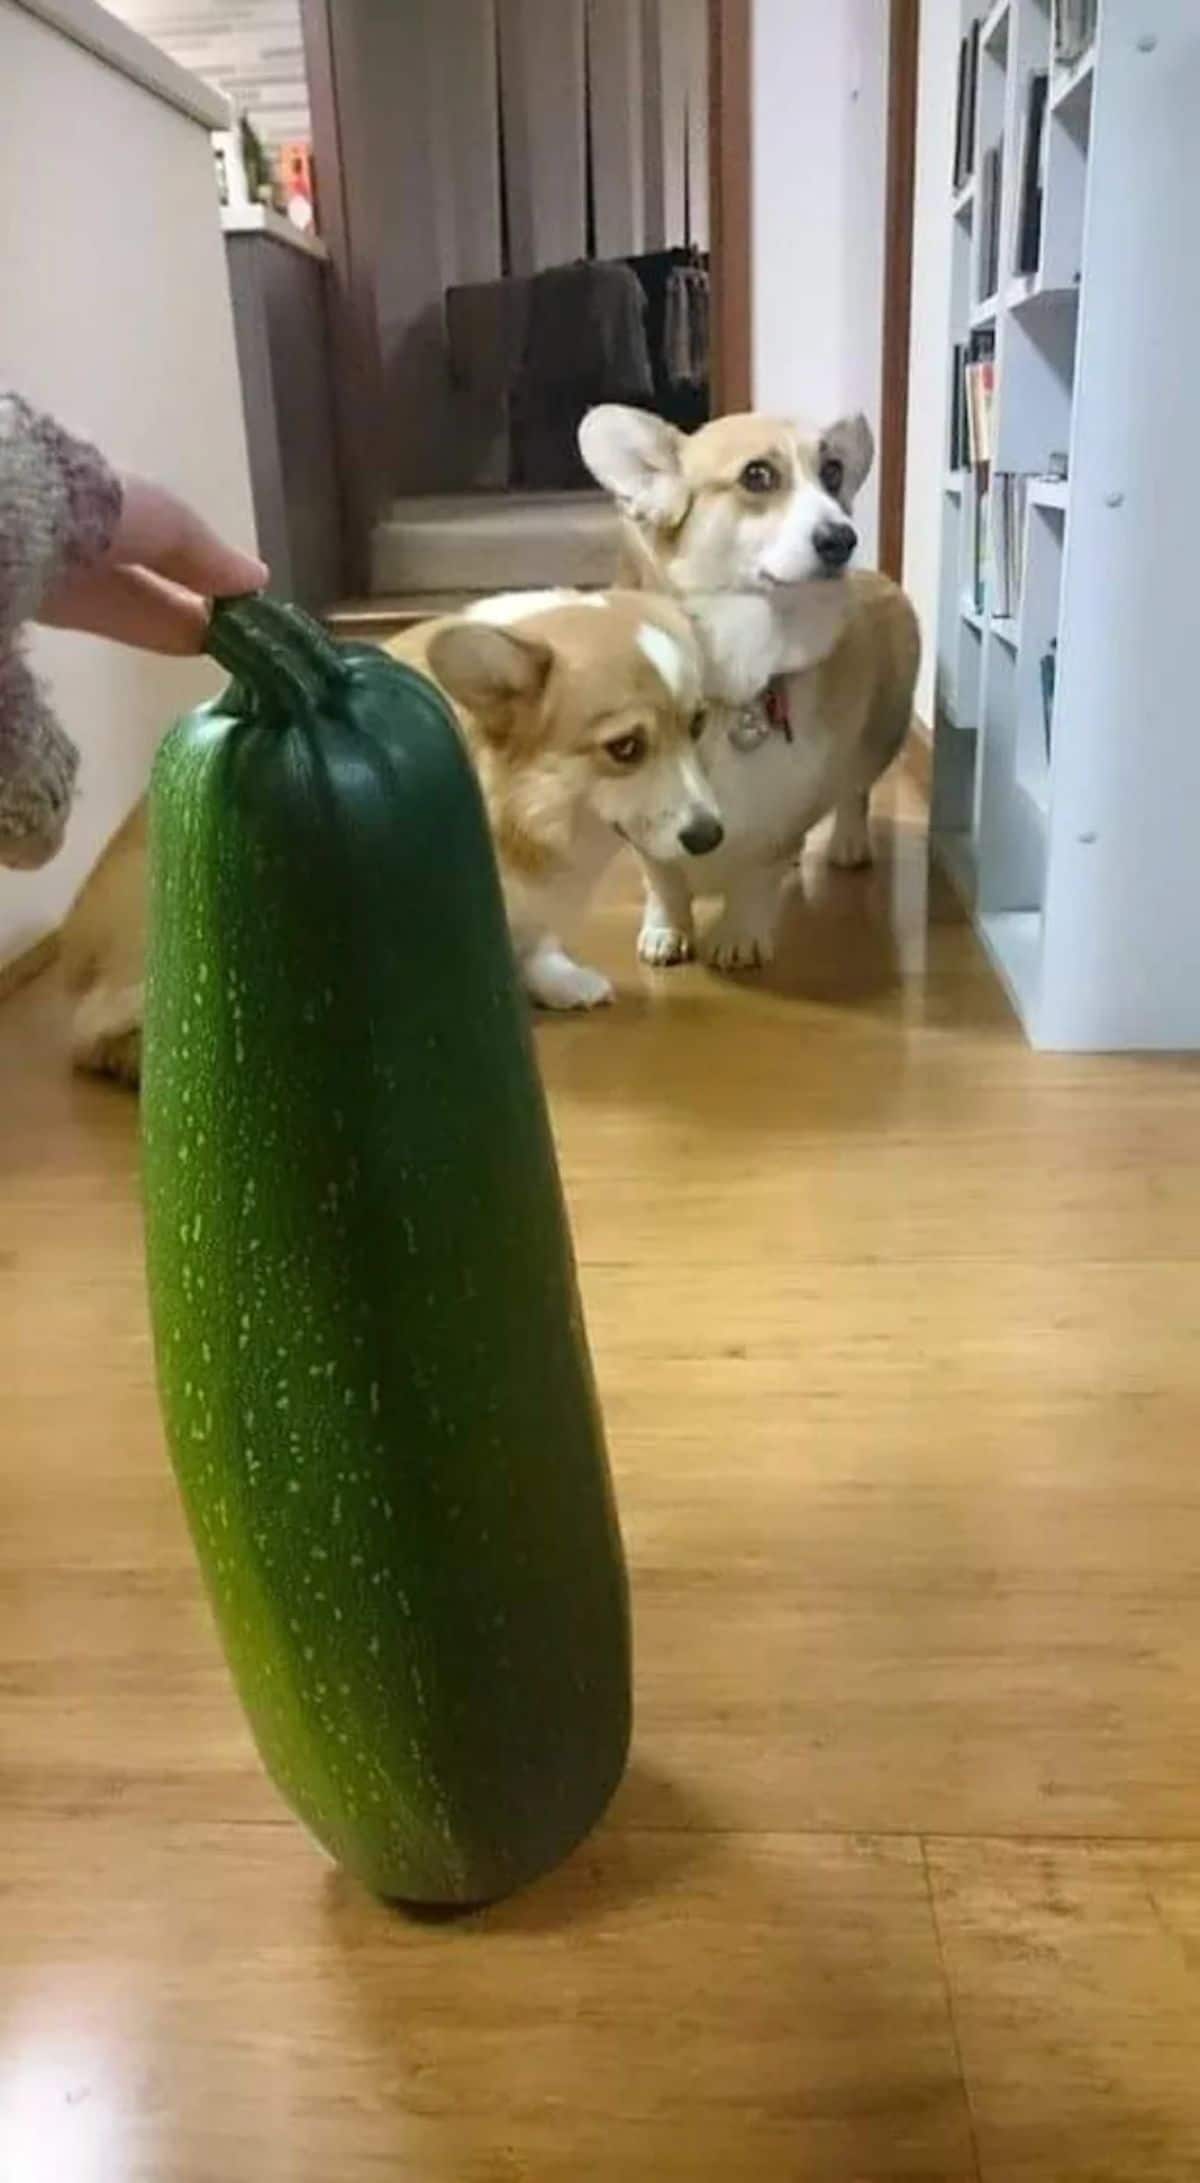 2 brown and white corgis looking afraid of a large green zucchini